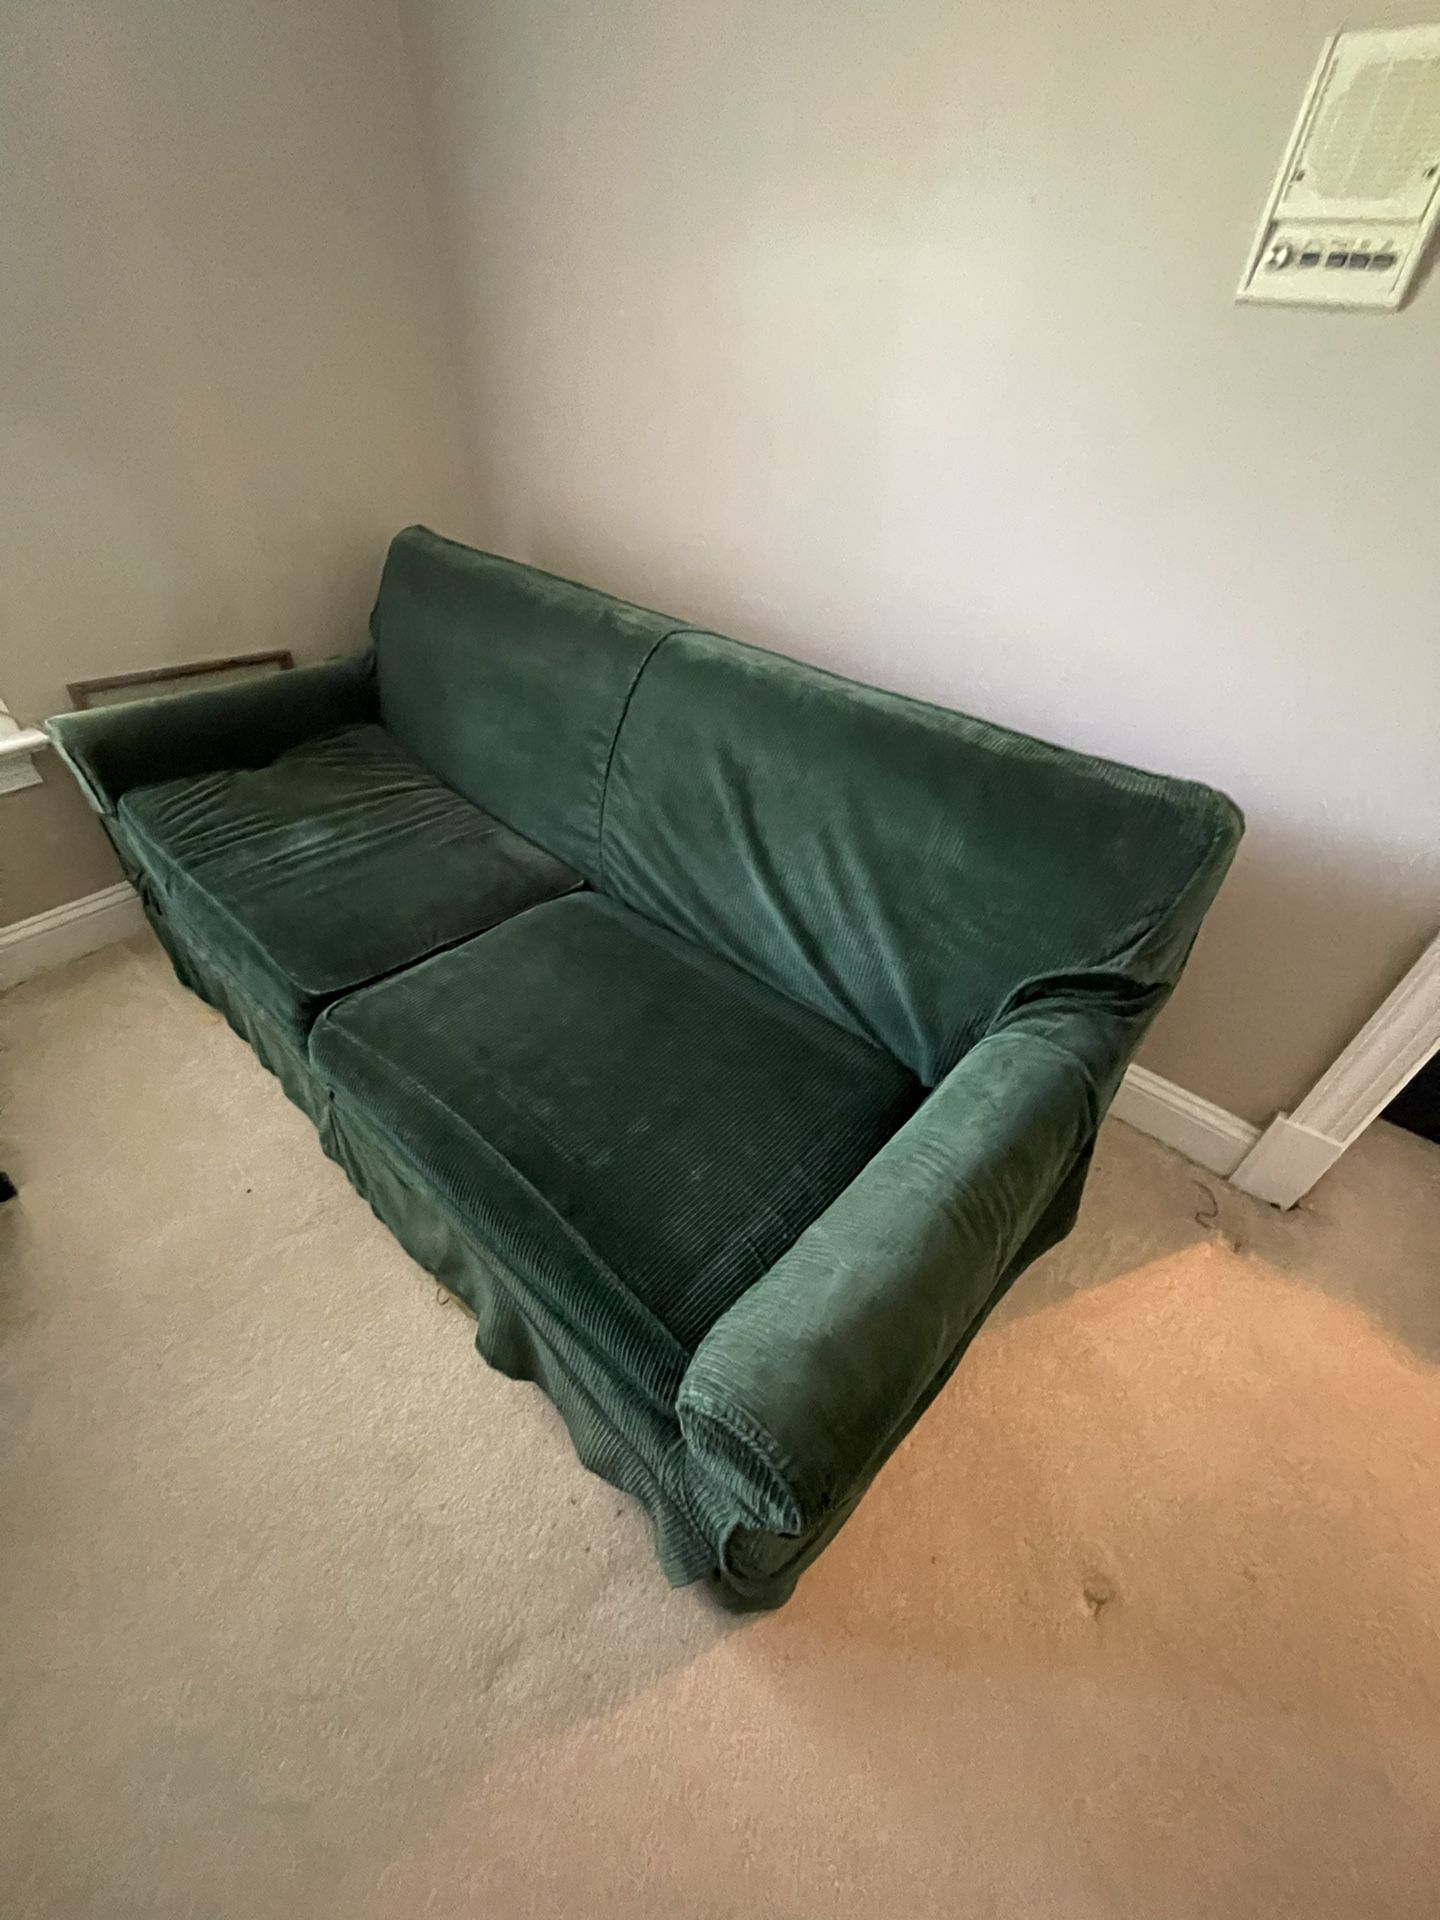 Free Couch & TV